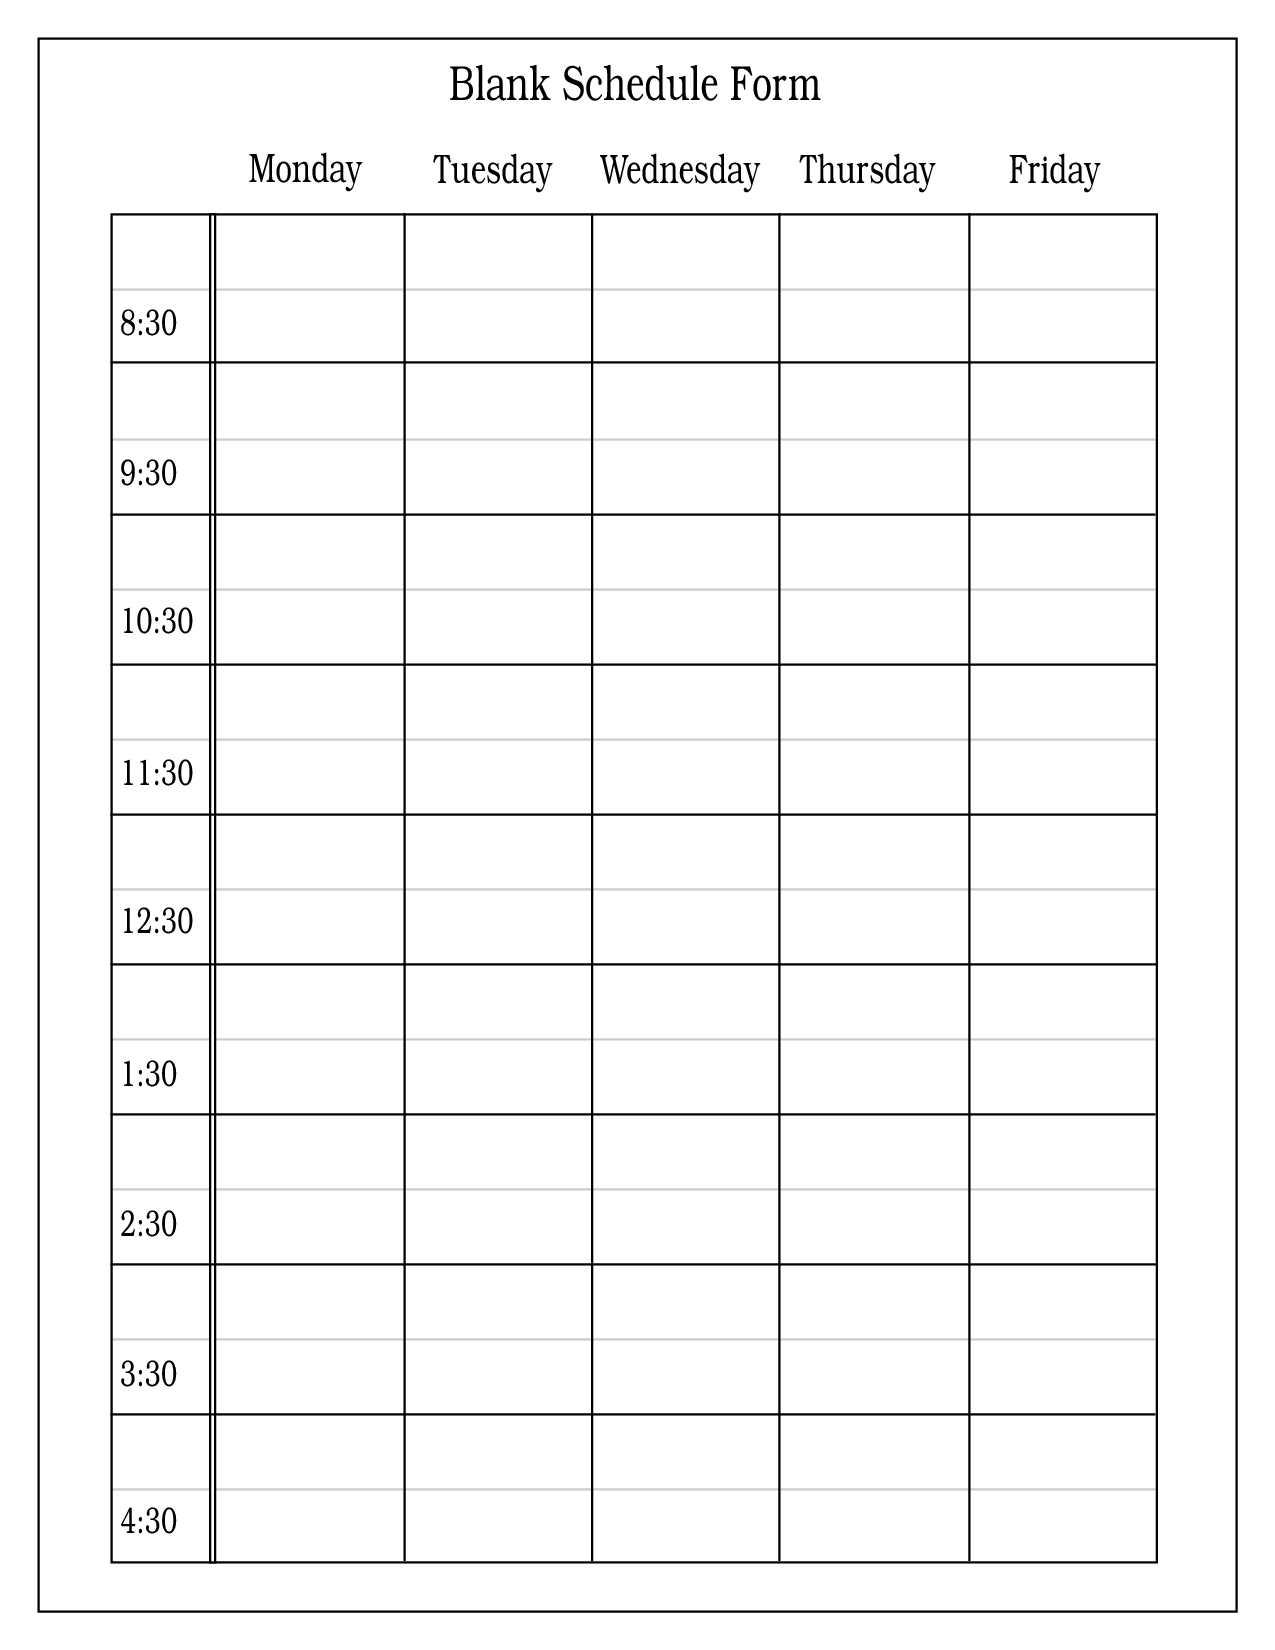 Free+Blank+Daily+Schedule+Form | Daily Schedule Template in Blank Class Schedule Template